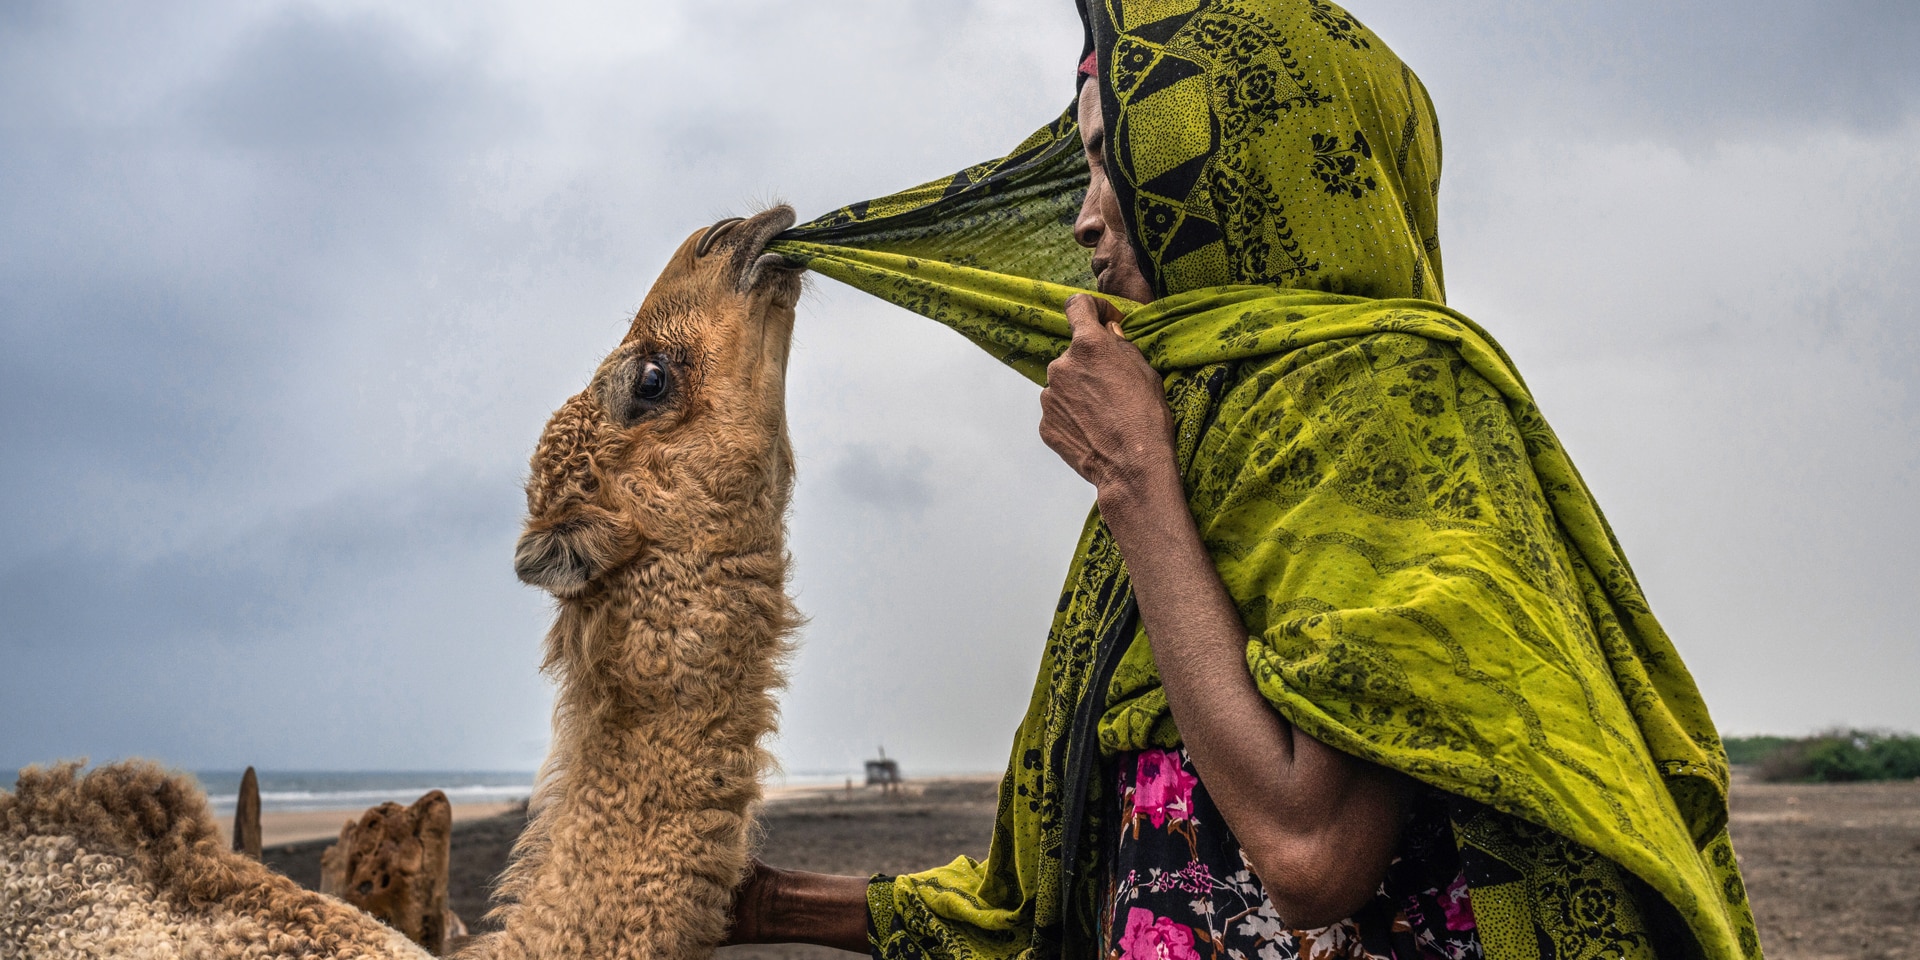 A camel nibbles on a woman's headscarf. The woman holds the headscarf under her chin with one hand and strokes the camel with the other.